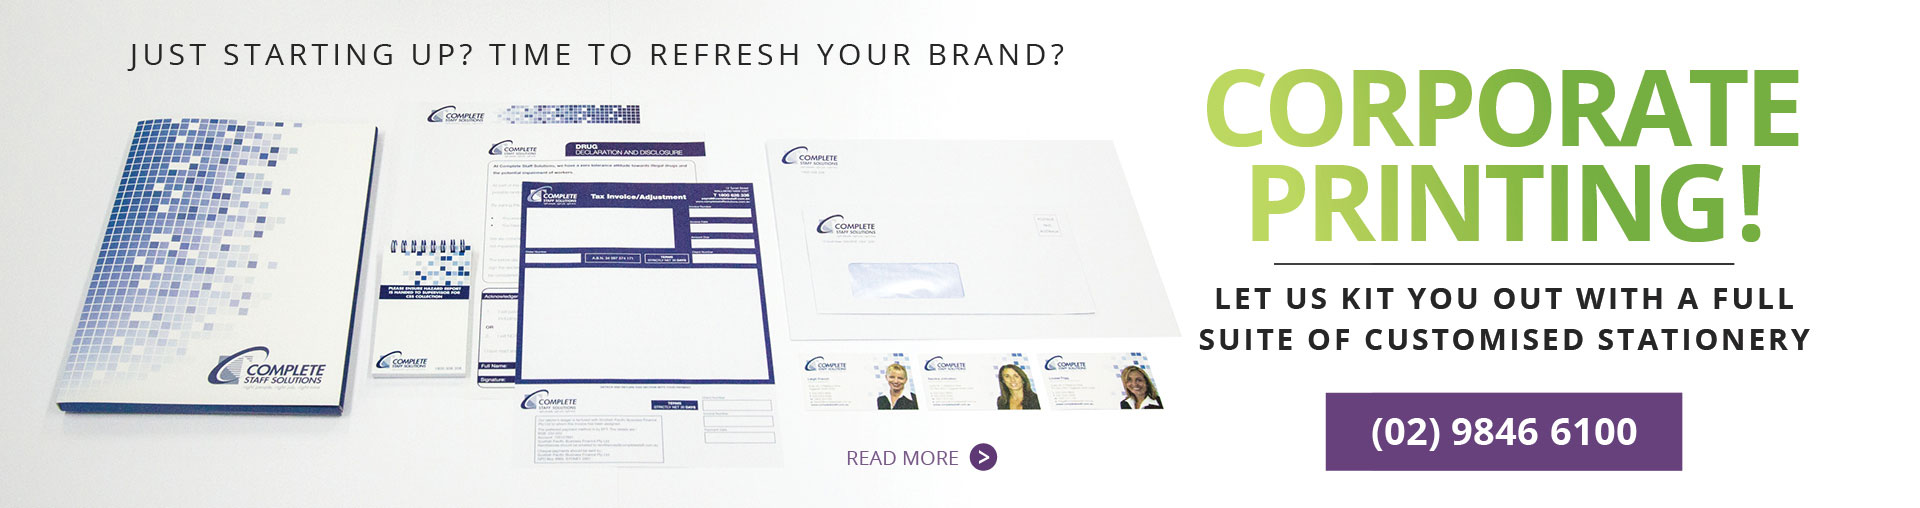 Just starting up? Time to refresh your brand? Corporate Printing! // Let us kit you out with a full suite of customised stationery // Read more